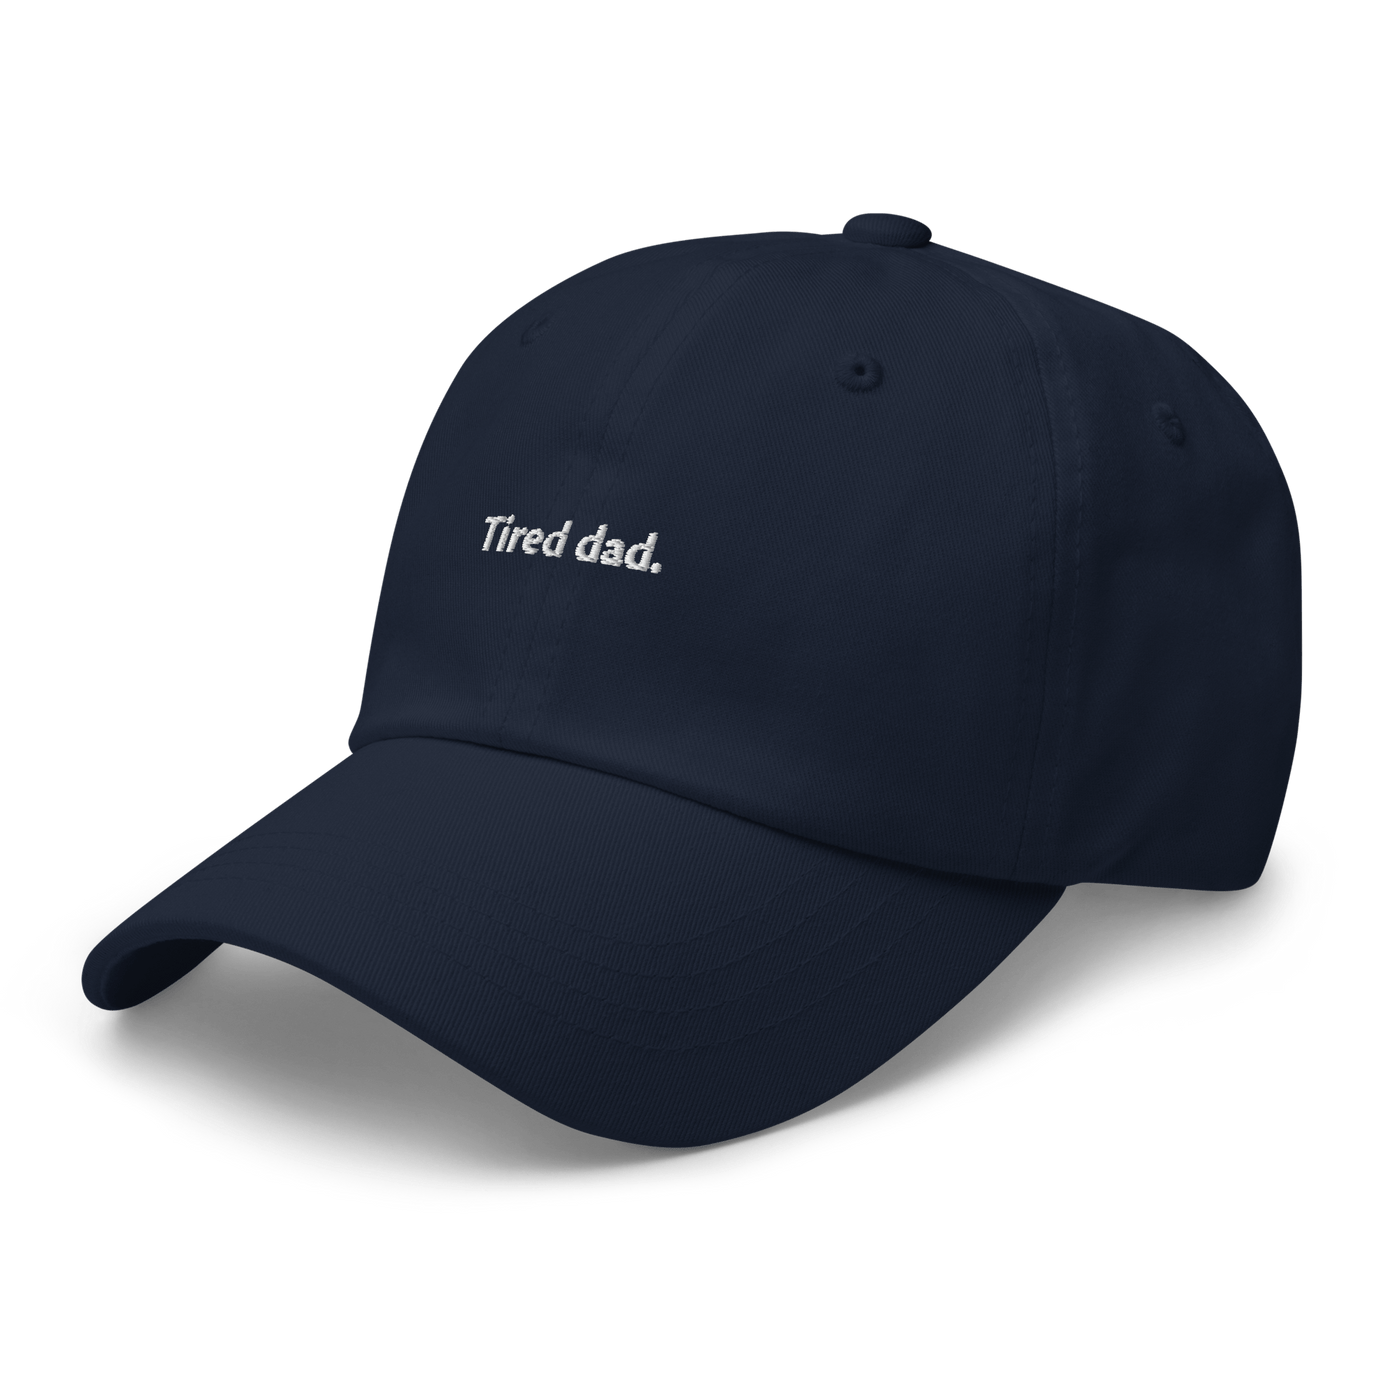 Tired Dad Hat - Navy - - Just Another Cap Store